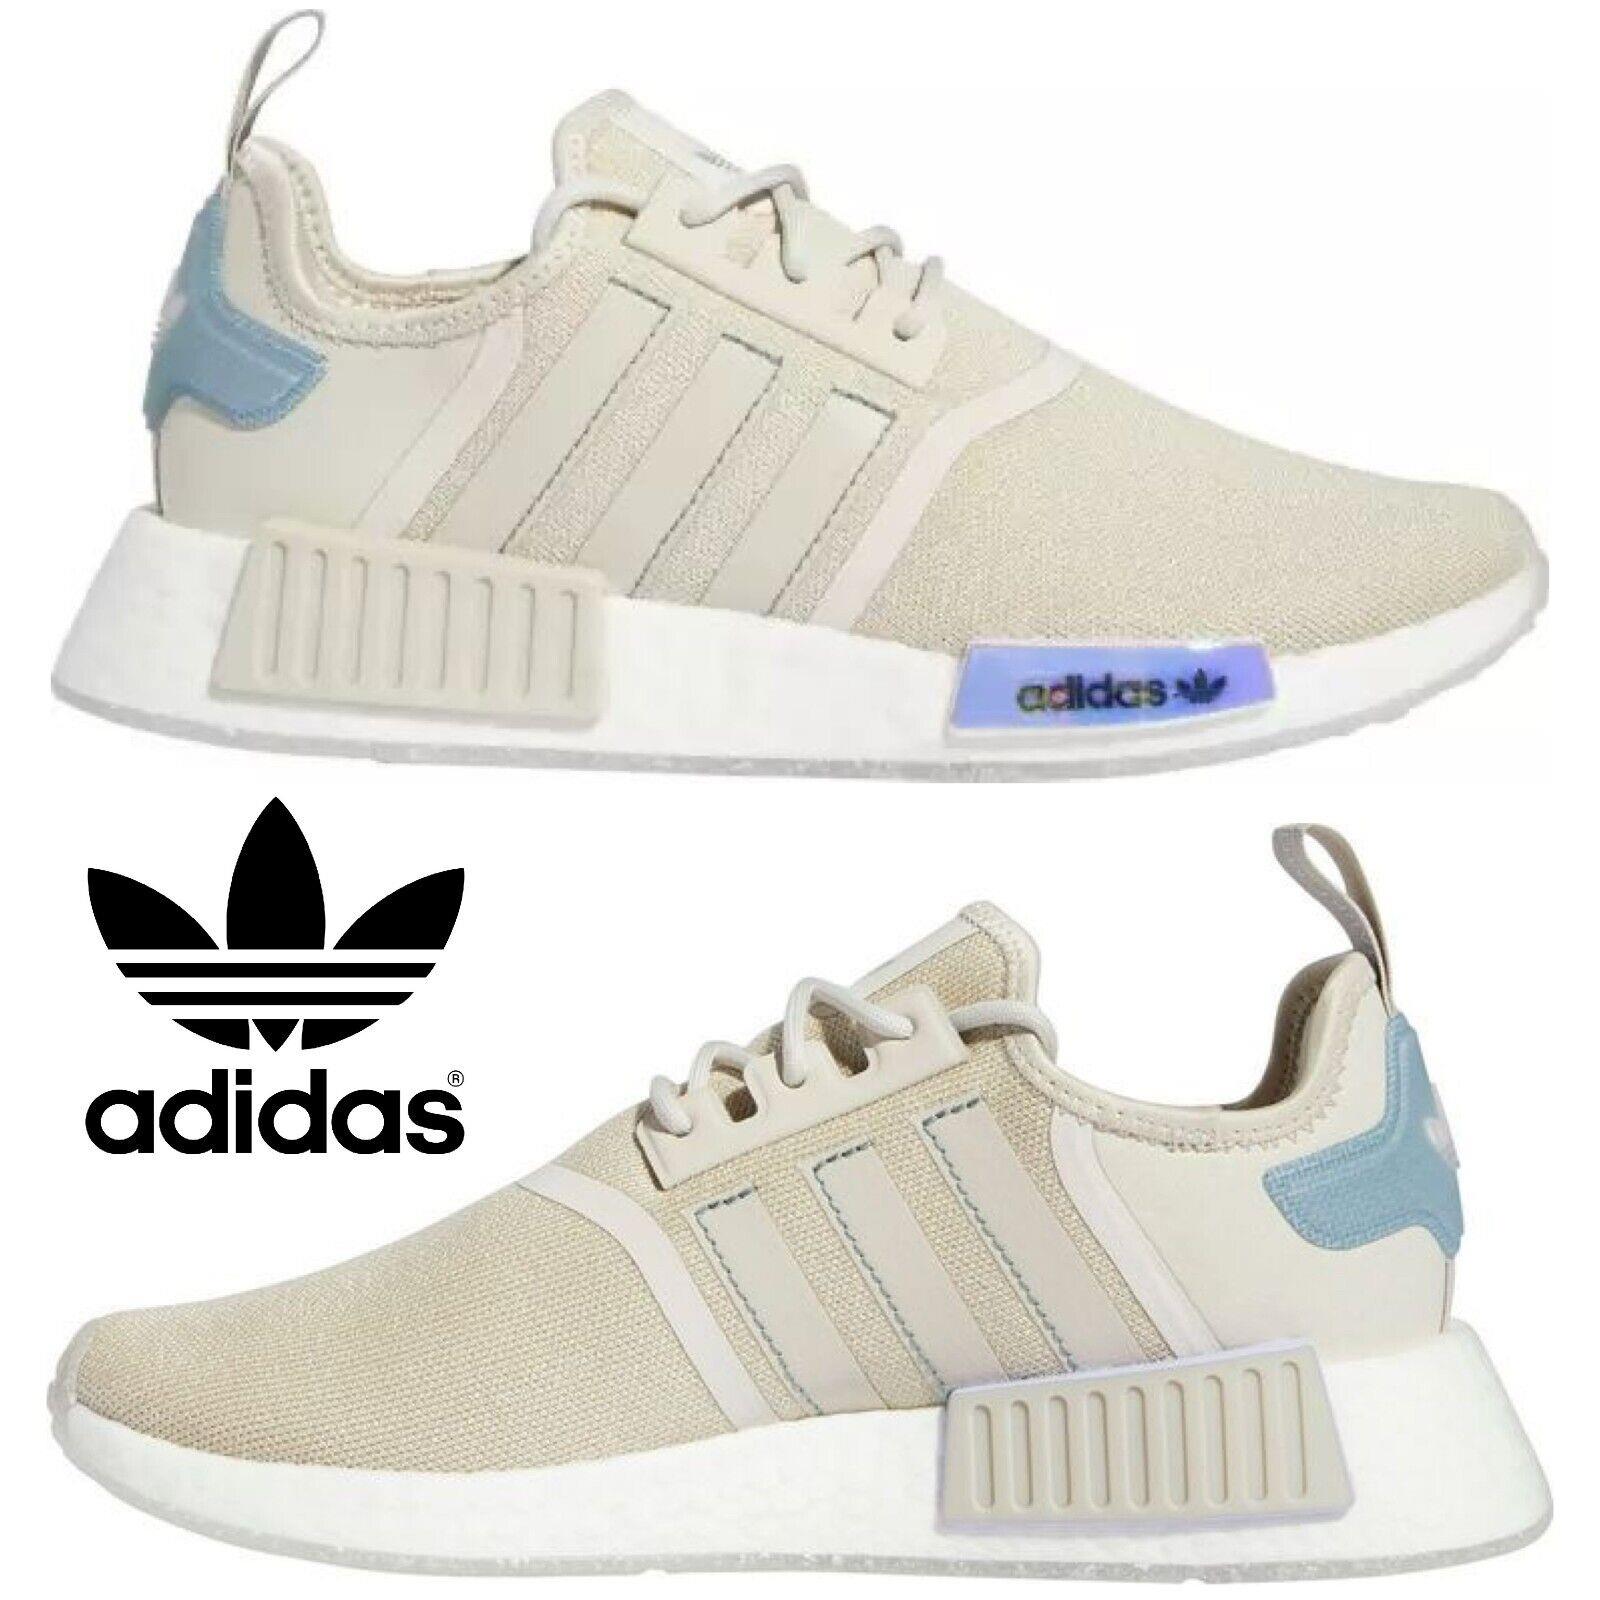 Adidas Originals Nmd R1 Women s Sneakers Casual Shoes Sport Running Clear Brown - Brown , CLEAR BROWN Manufacturer